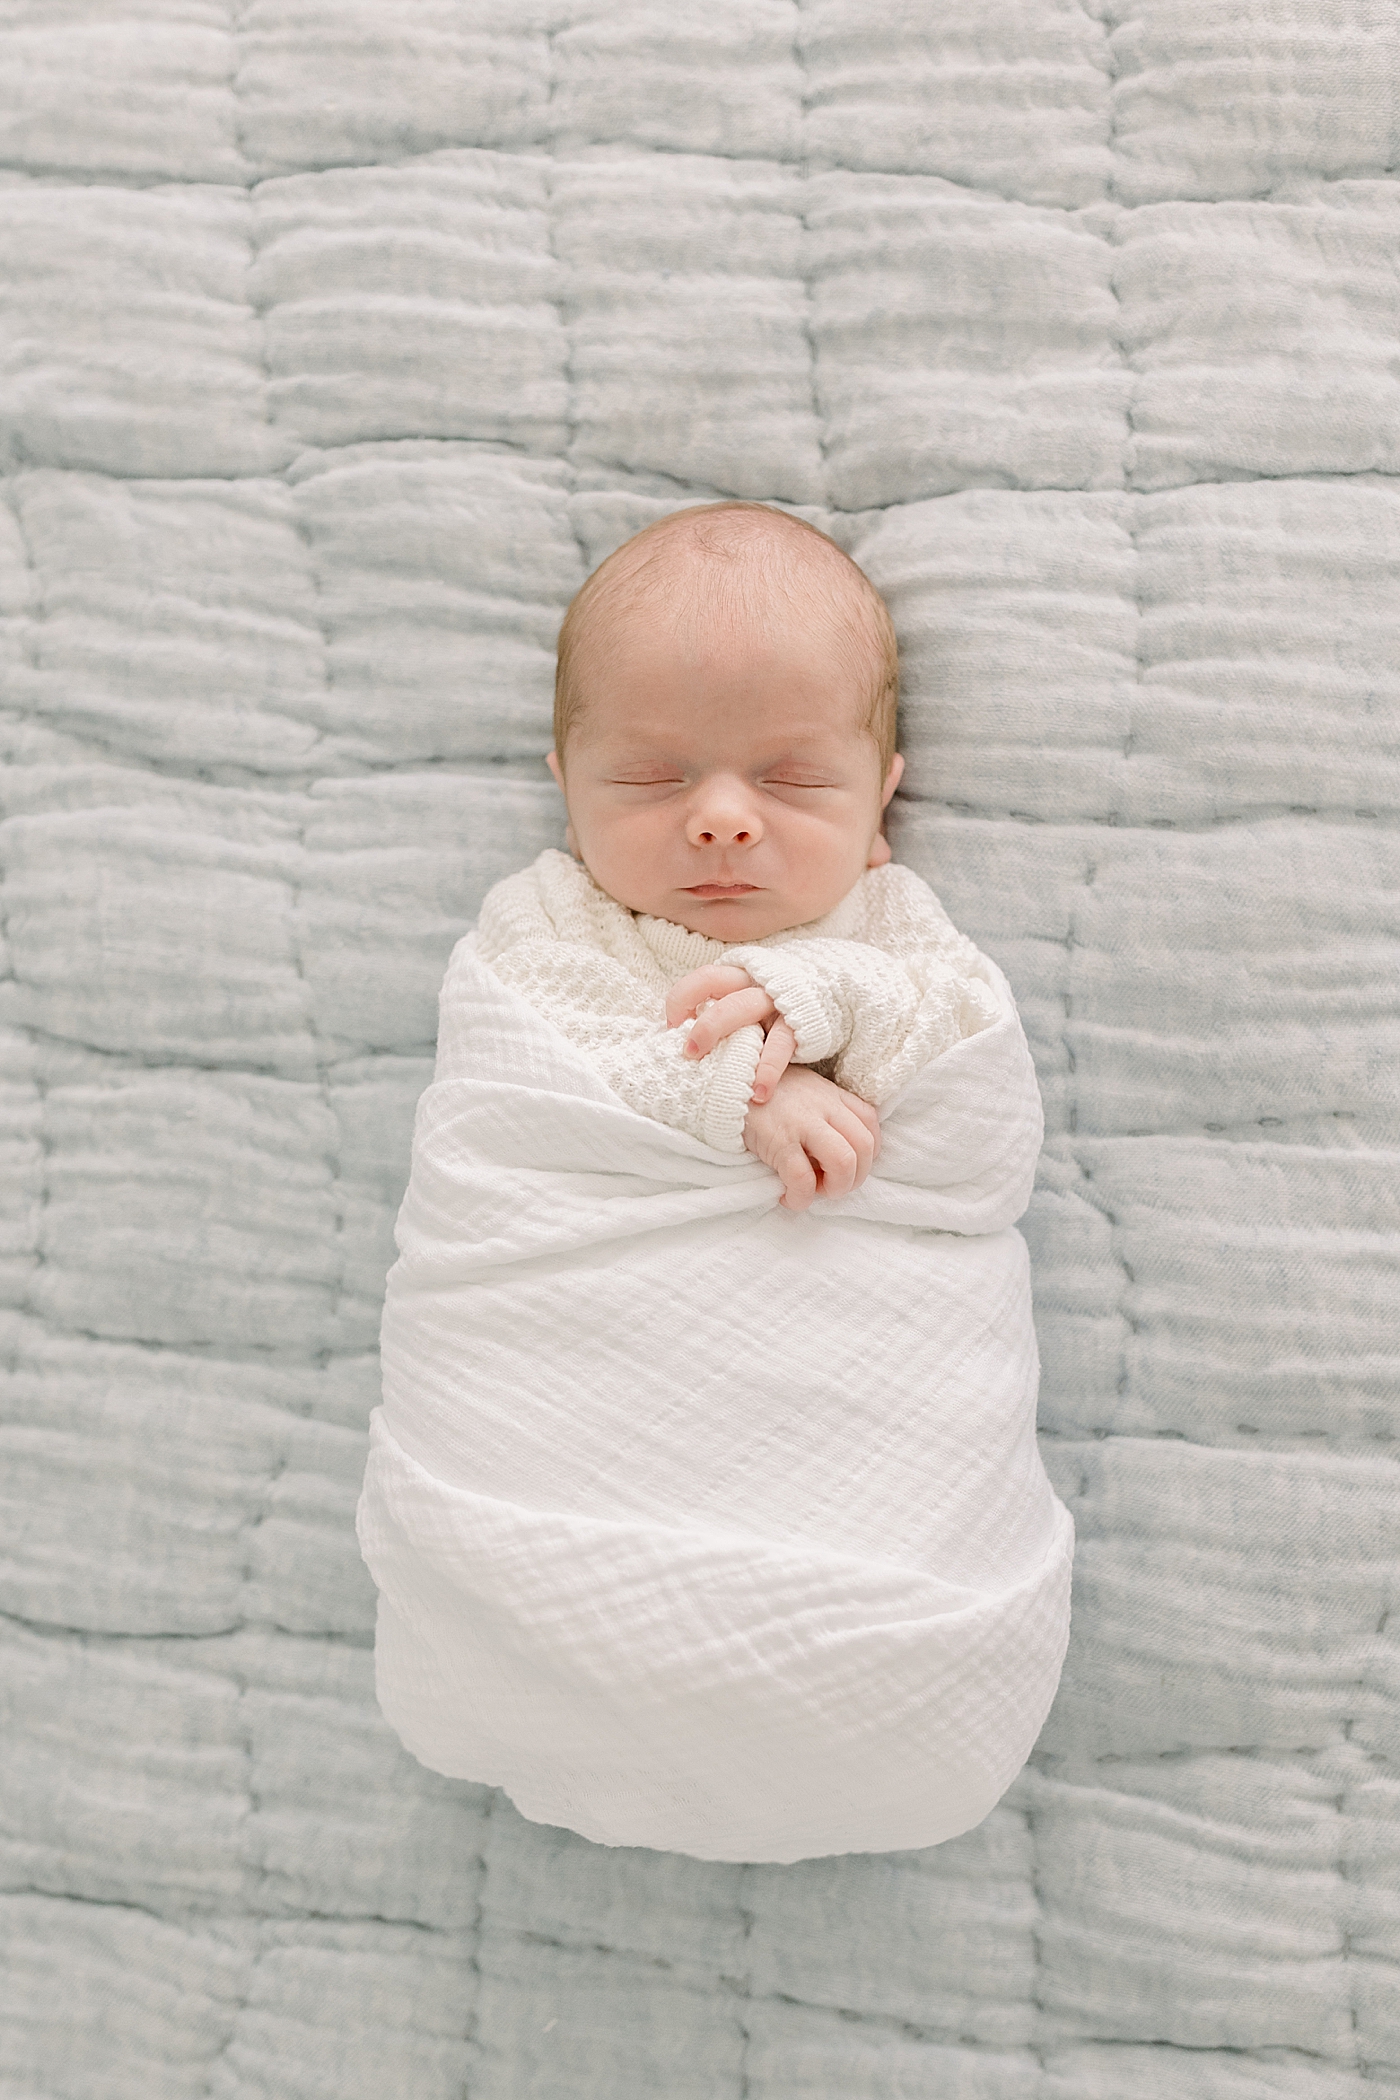 Baby boy wrapped in a white swaddle sleeping on a gray background | Photo by Caitlyn Motycka Photography